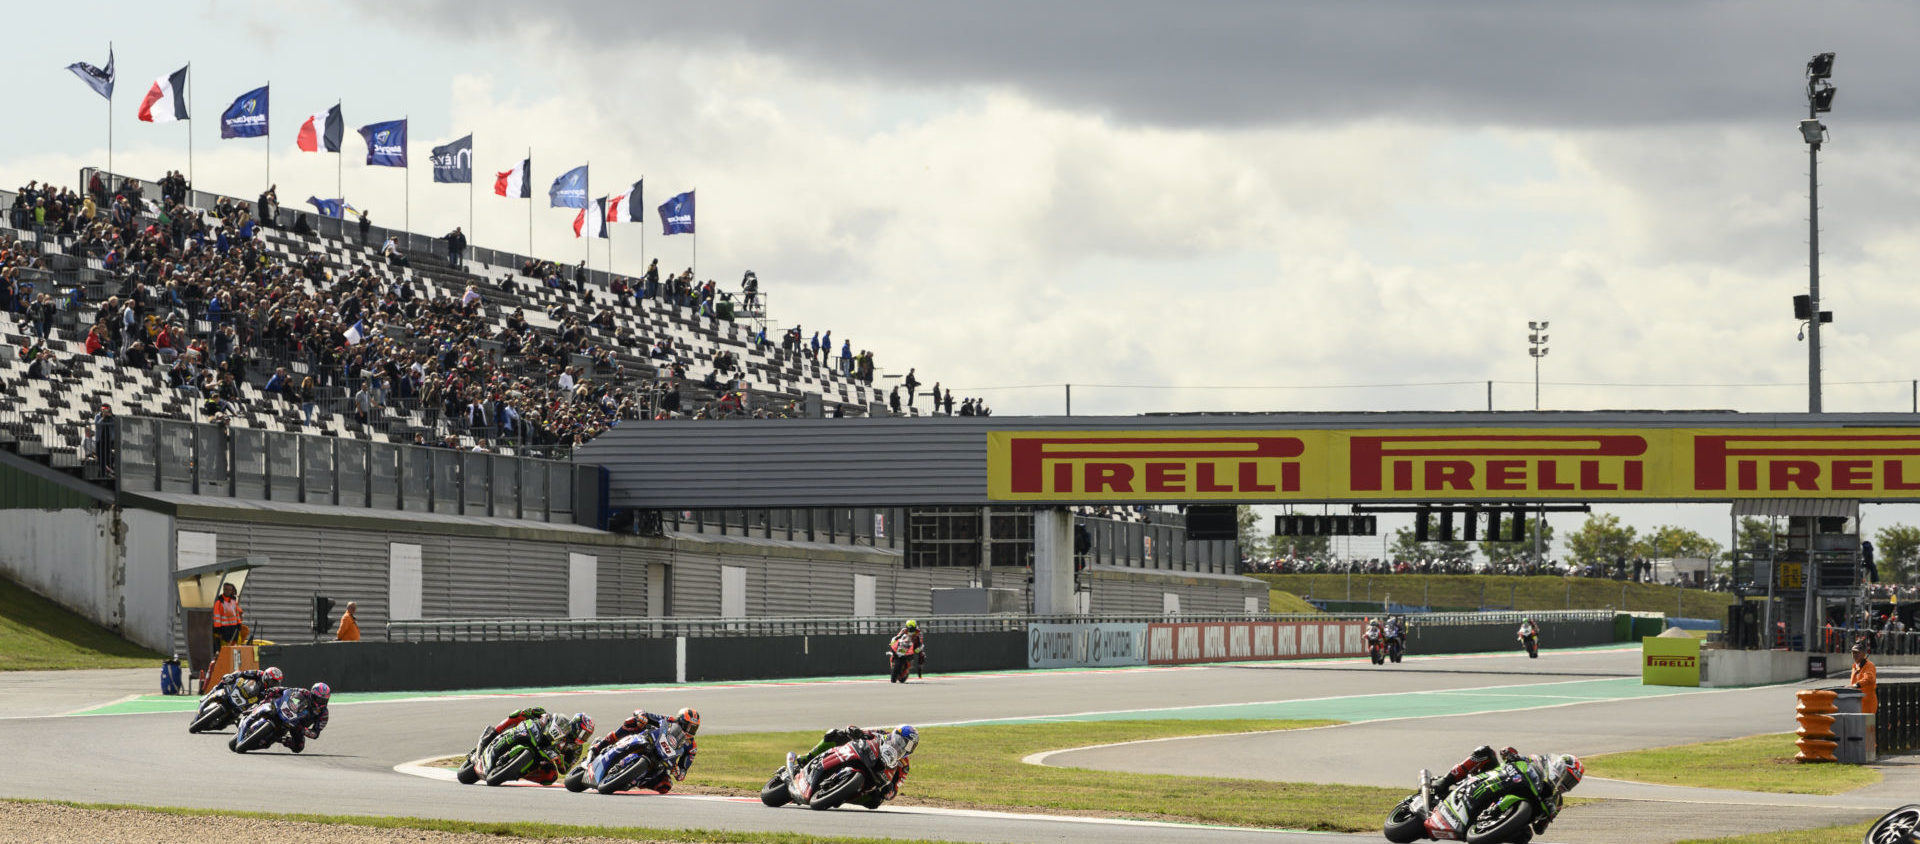 Action from a World Superbike race at Magny-Cours in 2019. Photo courtesy of Dorna.